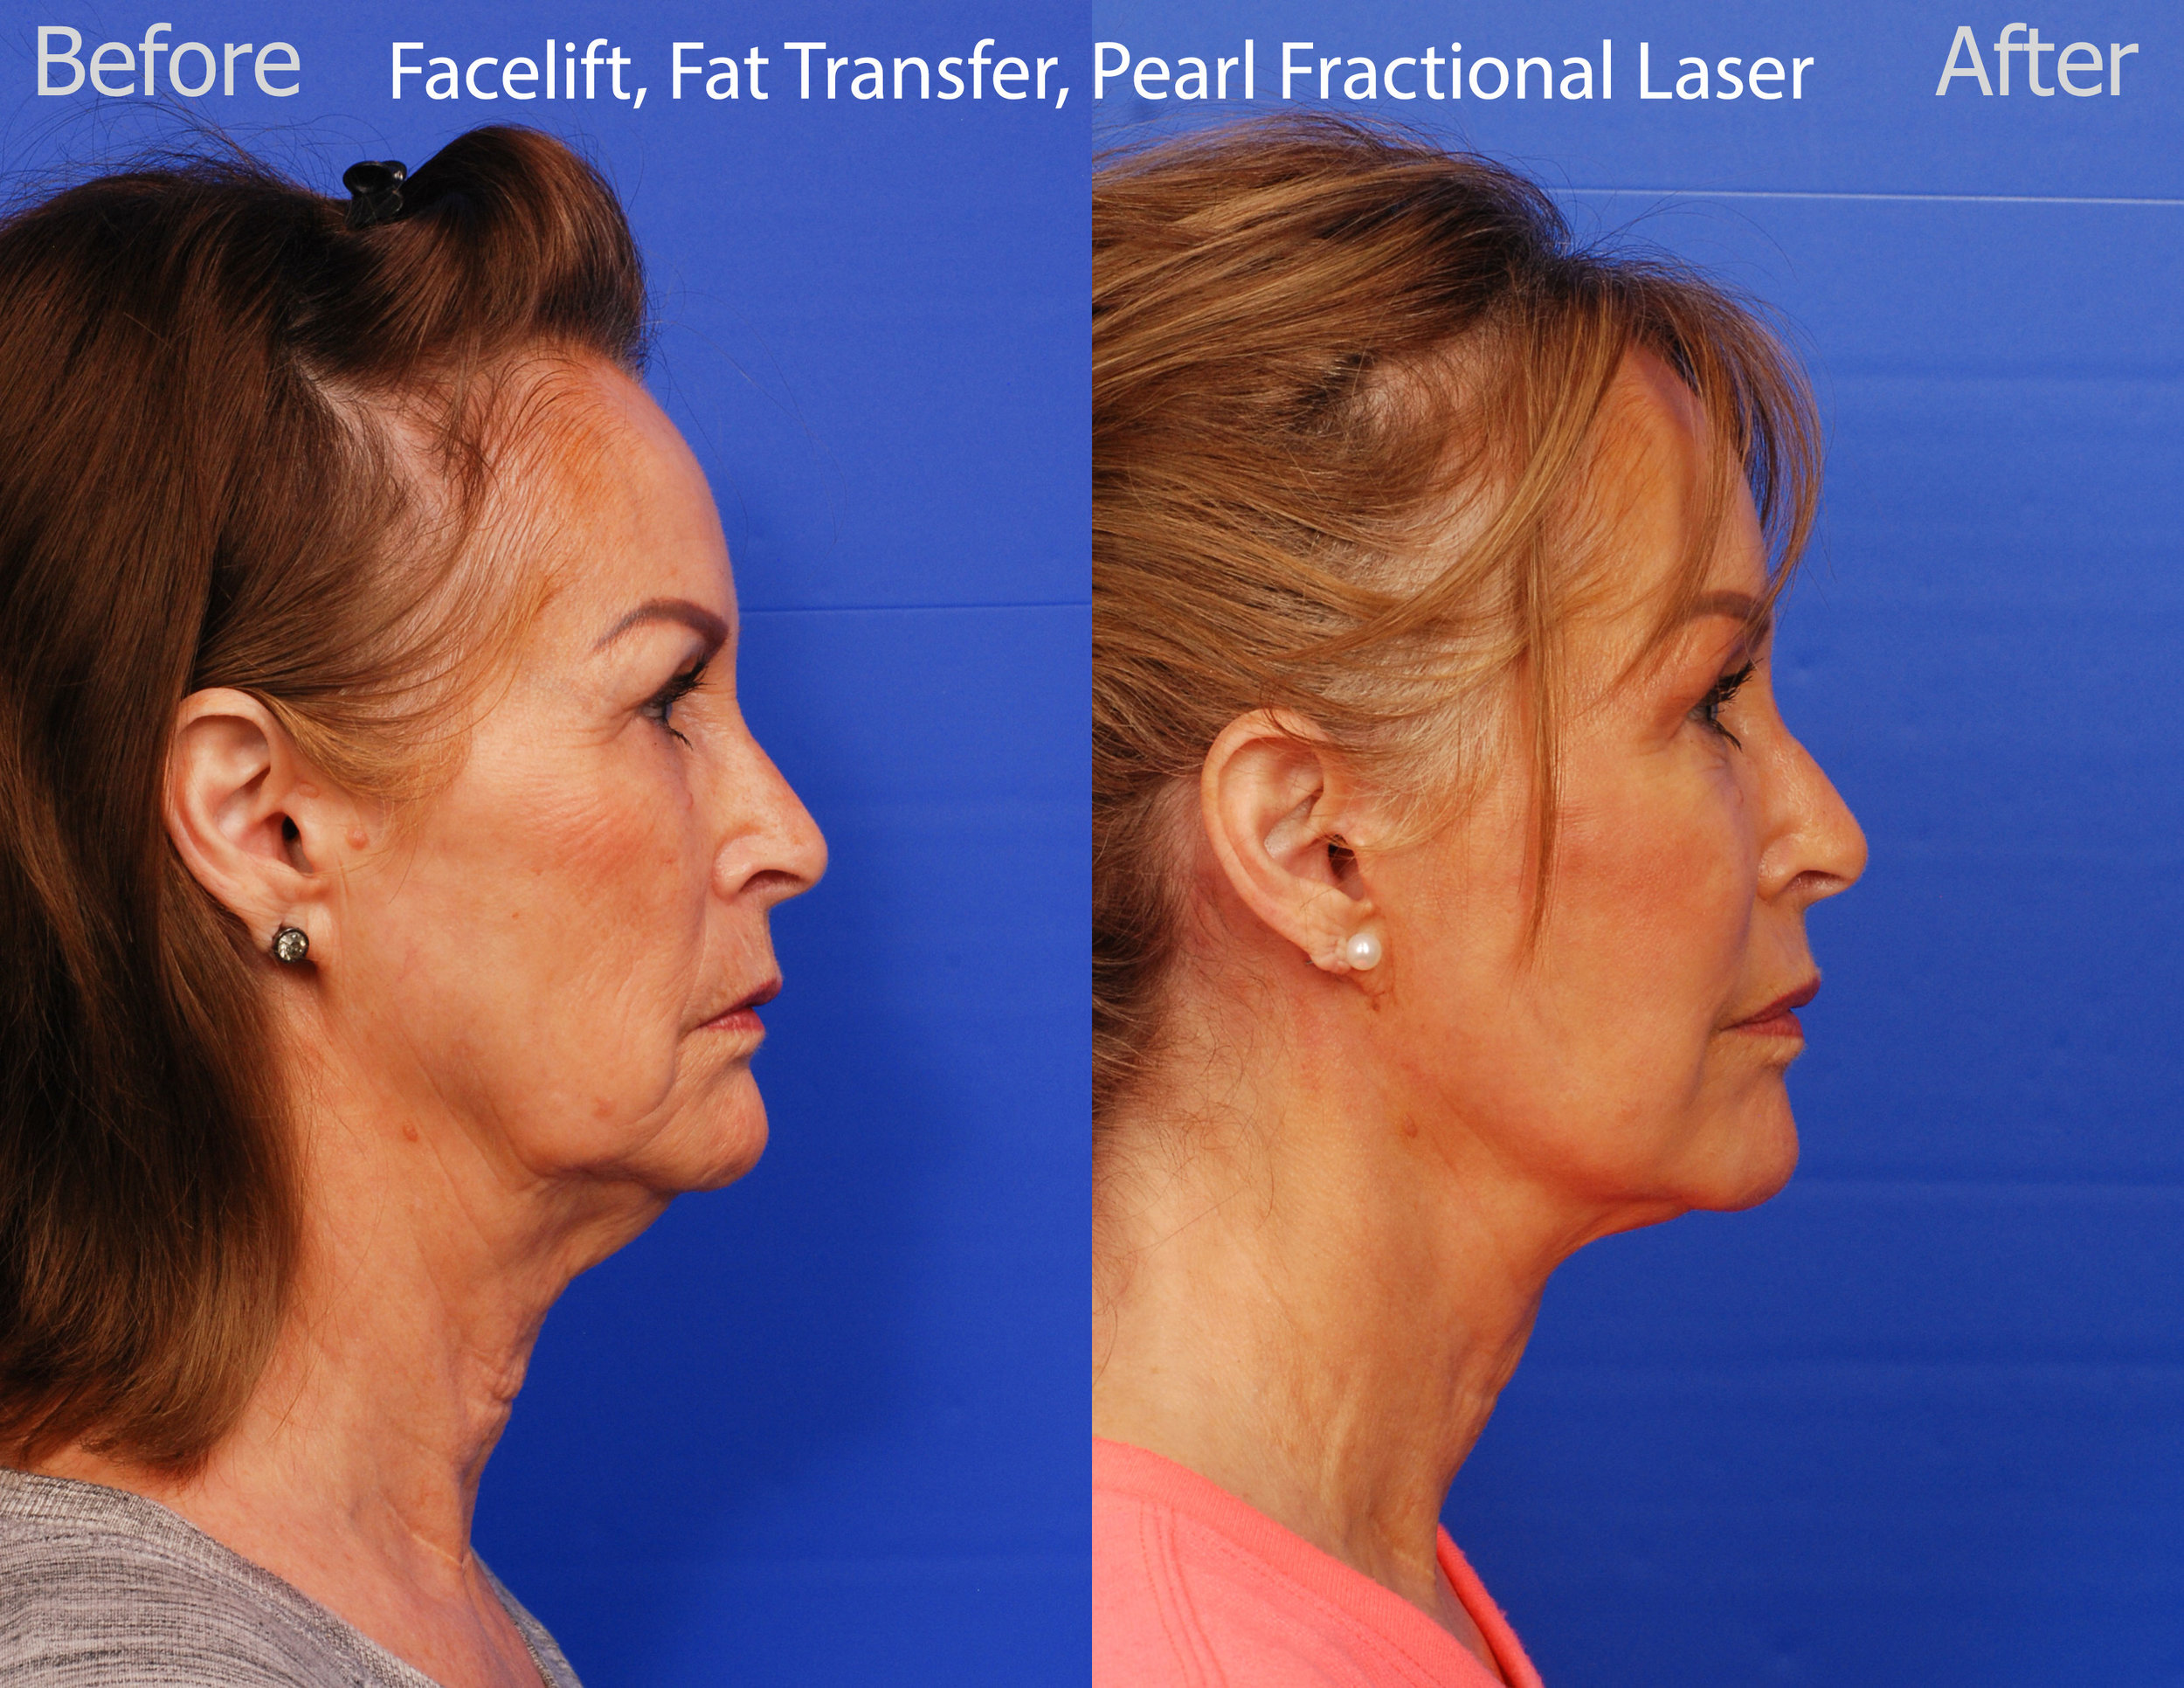 Facelift, Pearl Fractional Laser and Fat Transfer - San Diego